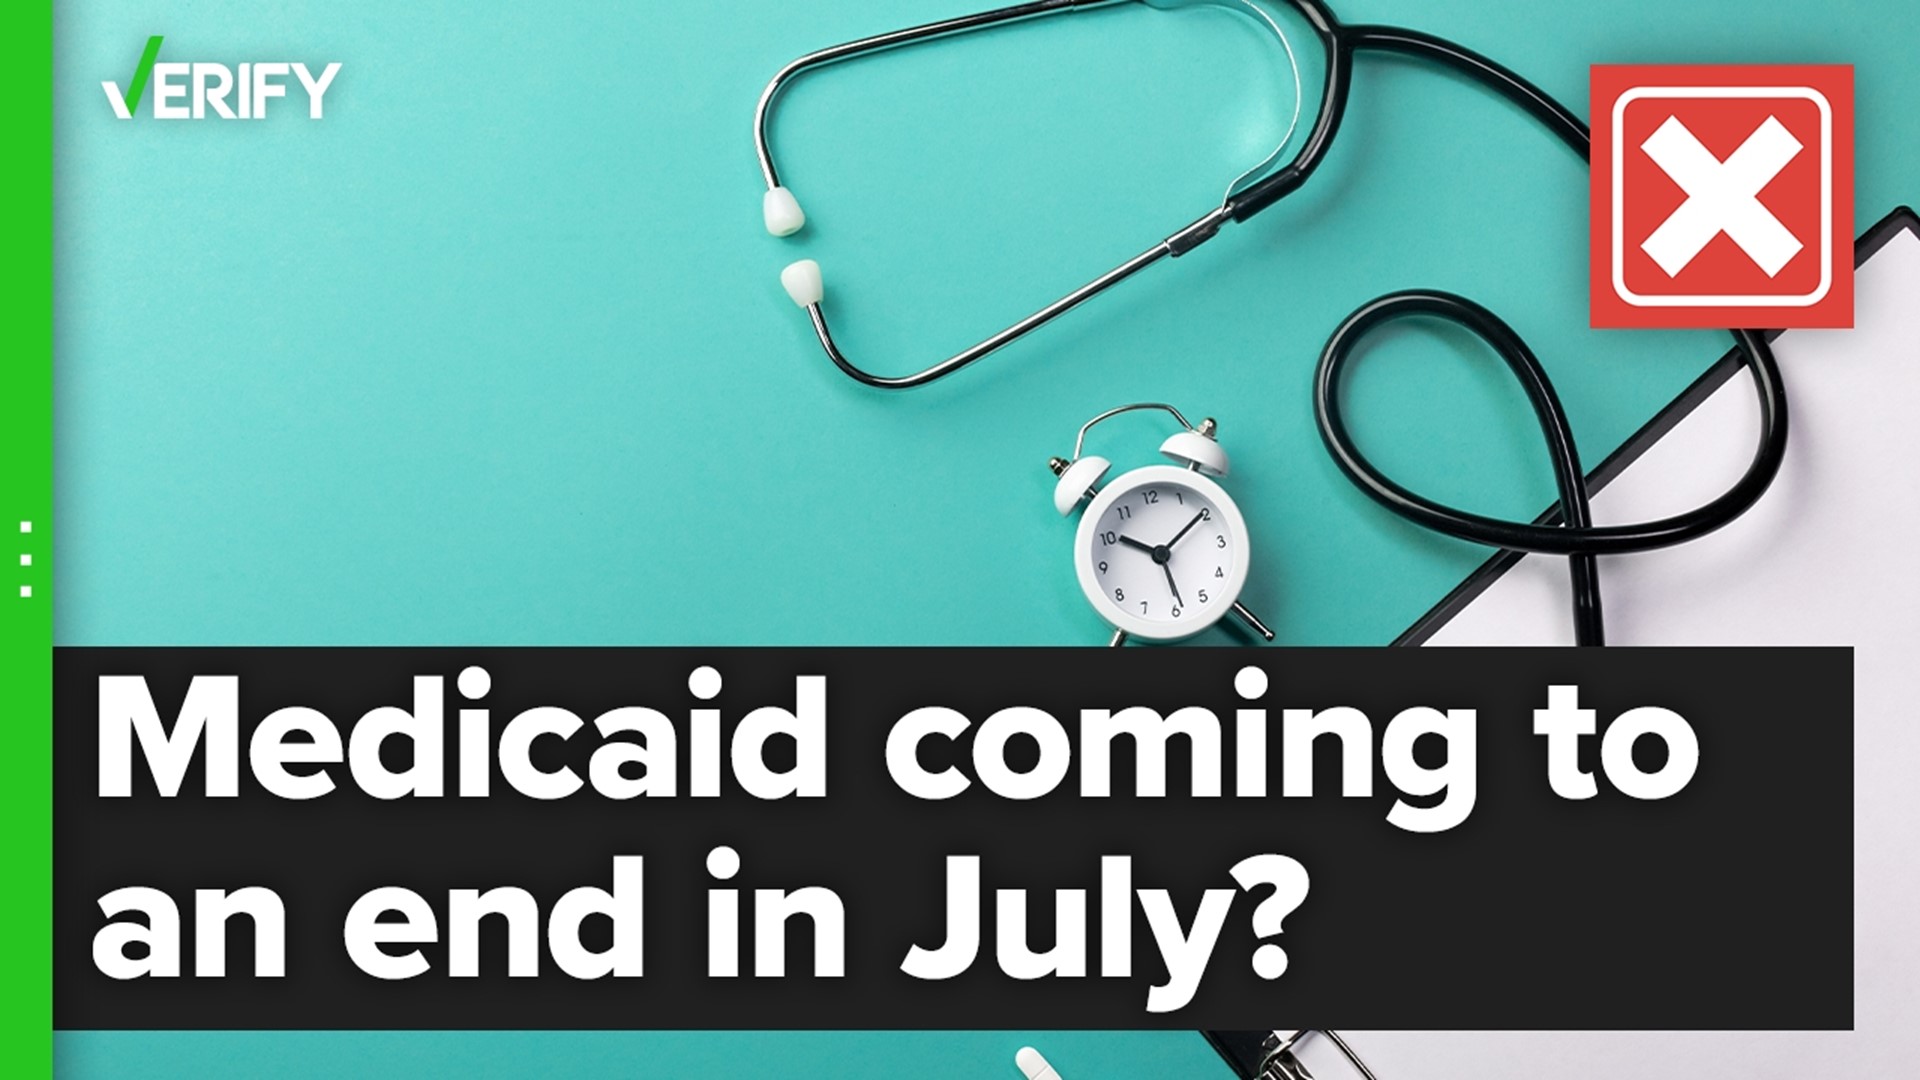 Is Medicaid coming to an end in July? The VERIFY team confirms this is false.